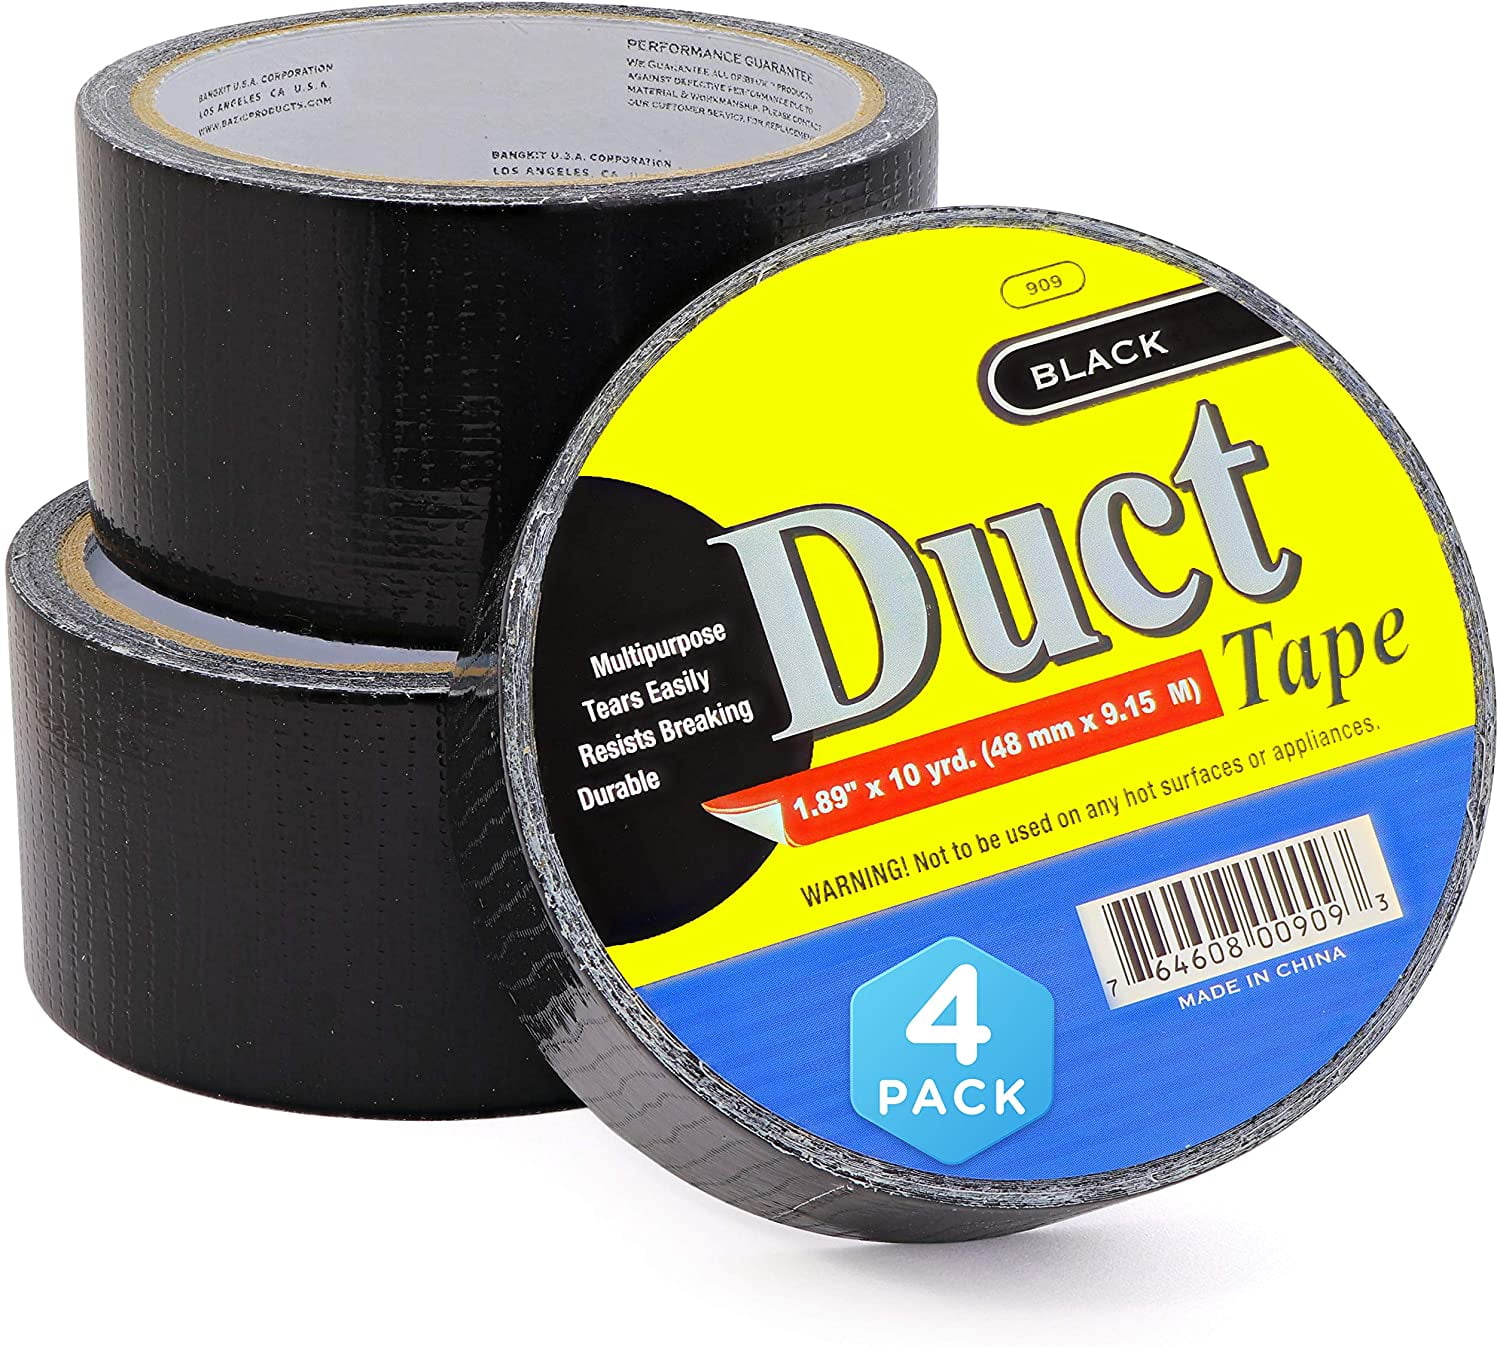 Pink Electrical Tape 3/4 x 66 ft Roll 7 mil